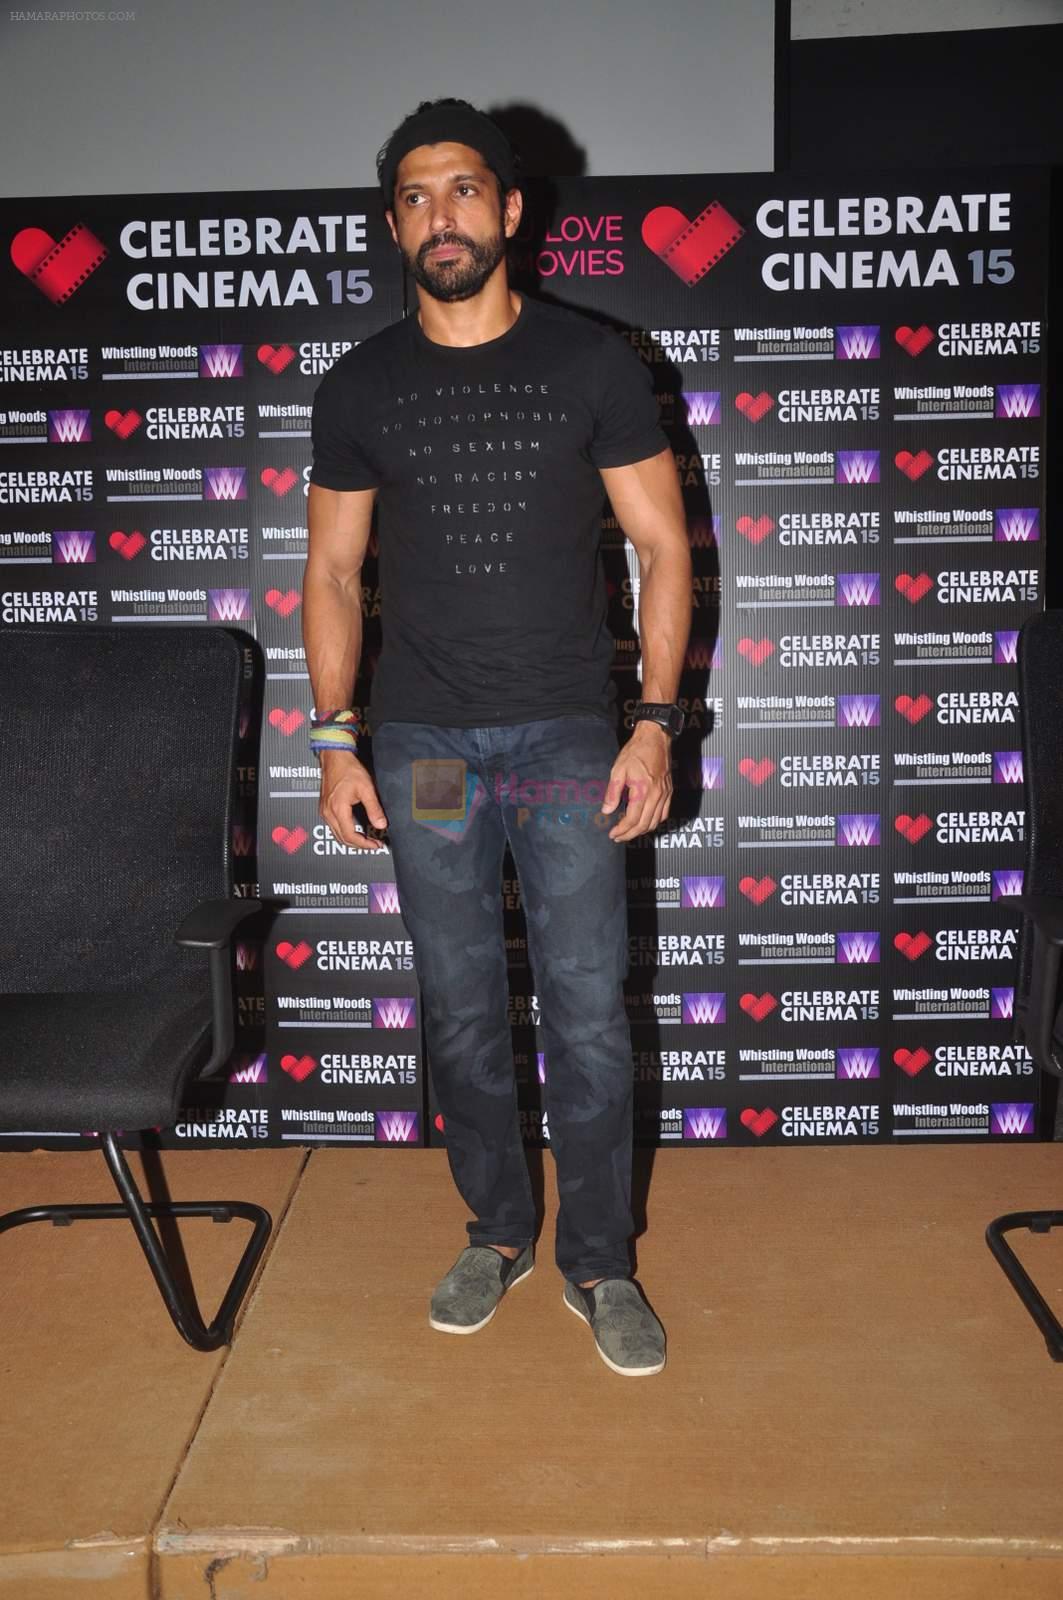 Farhan Akhtar as a speaker at Whistling Woods in Filmcity on 12th Sept 2015